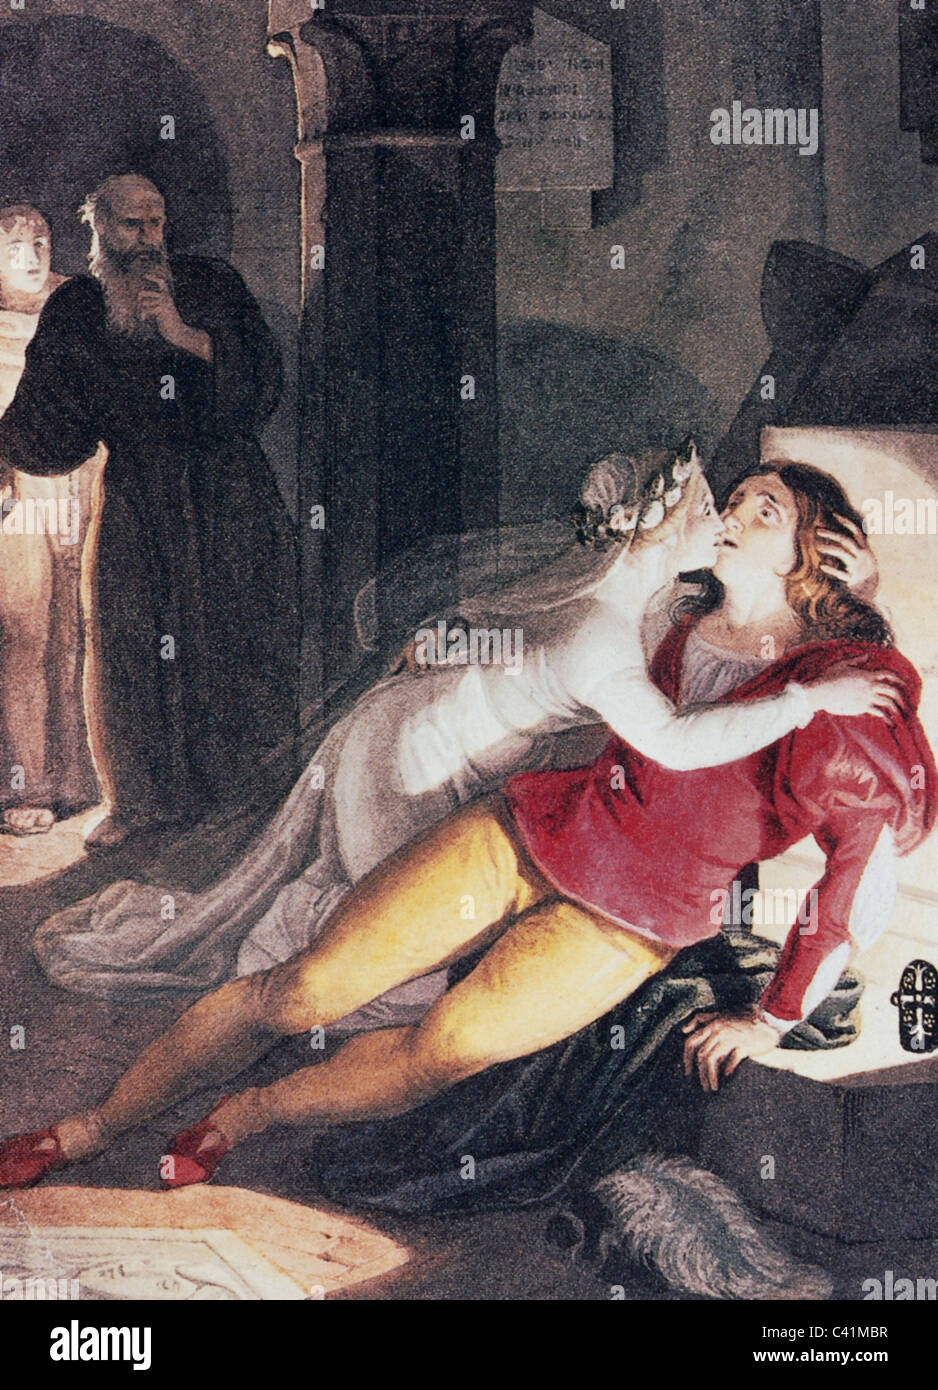 literature, 'Romeo and Juliet', novel by Tommaso Guardati Masuccio, 1476, Juliet embracing the dying Romeo, watercolour by Vitale Sala (1803 - 1835), watercolour on paper, 2,80 x 2,16 cm, 'Romeo i Giuletta', lovestory, later edition by Luigi da Porto 1524, Matteo Bandello 1554 and William Shakespeare 1597, Additional-Rights-Clearences-Not Available Stock Photo